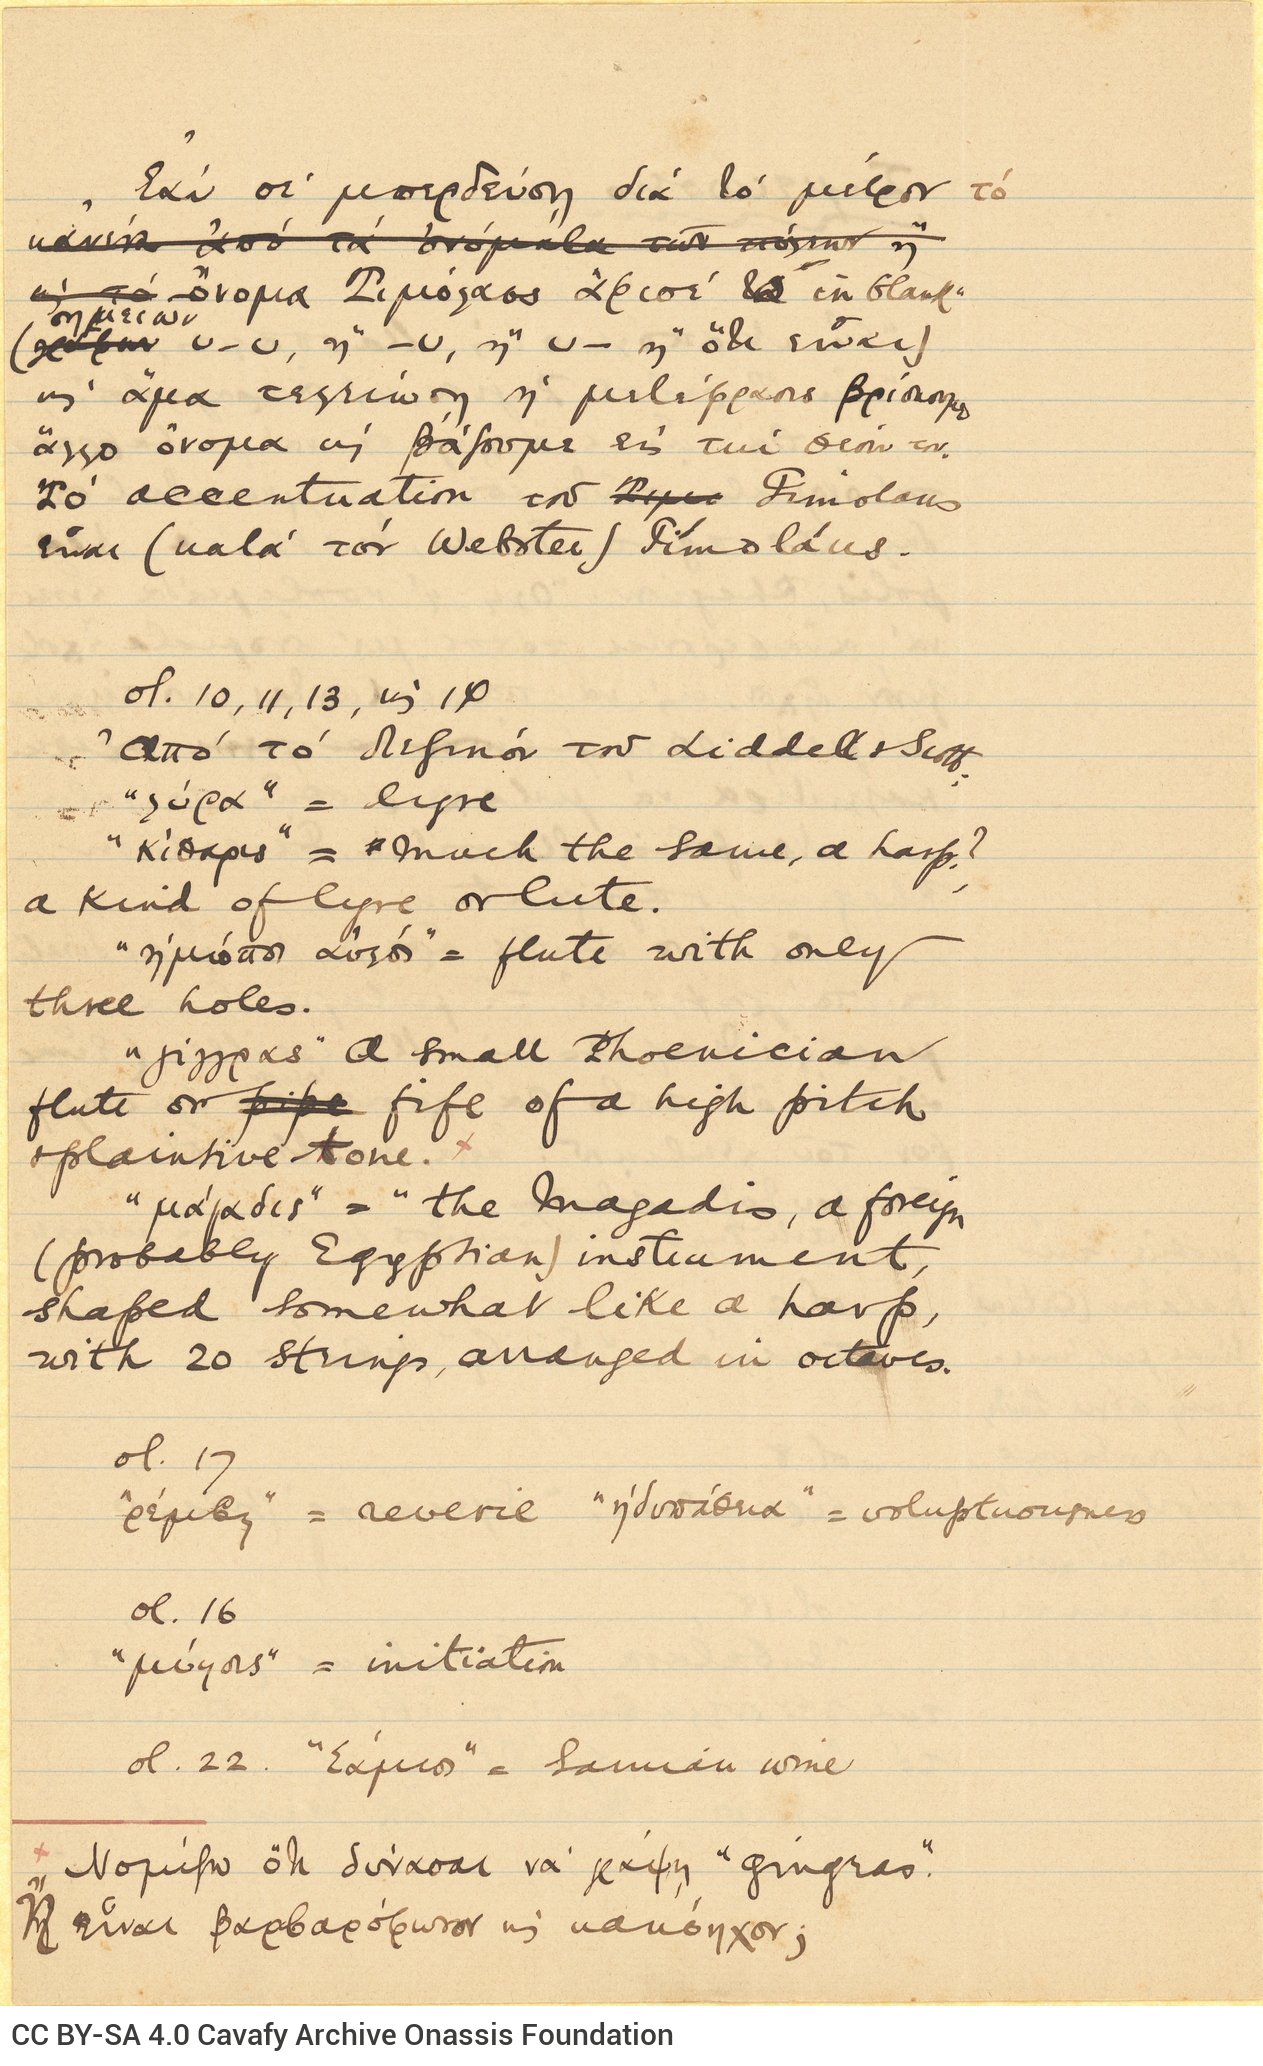 Handwritten notes on the first three pages of a double sheet notepaper. Instructions for the translation of the poem "Timo